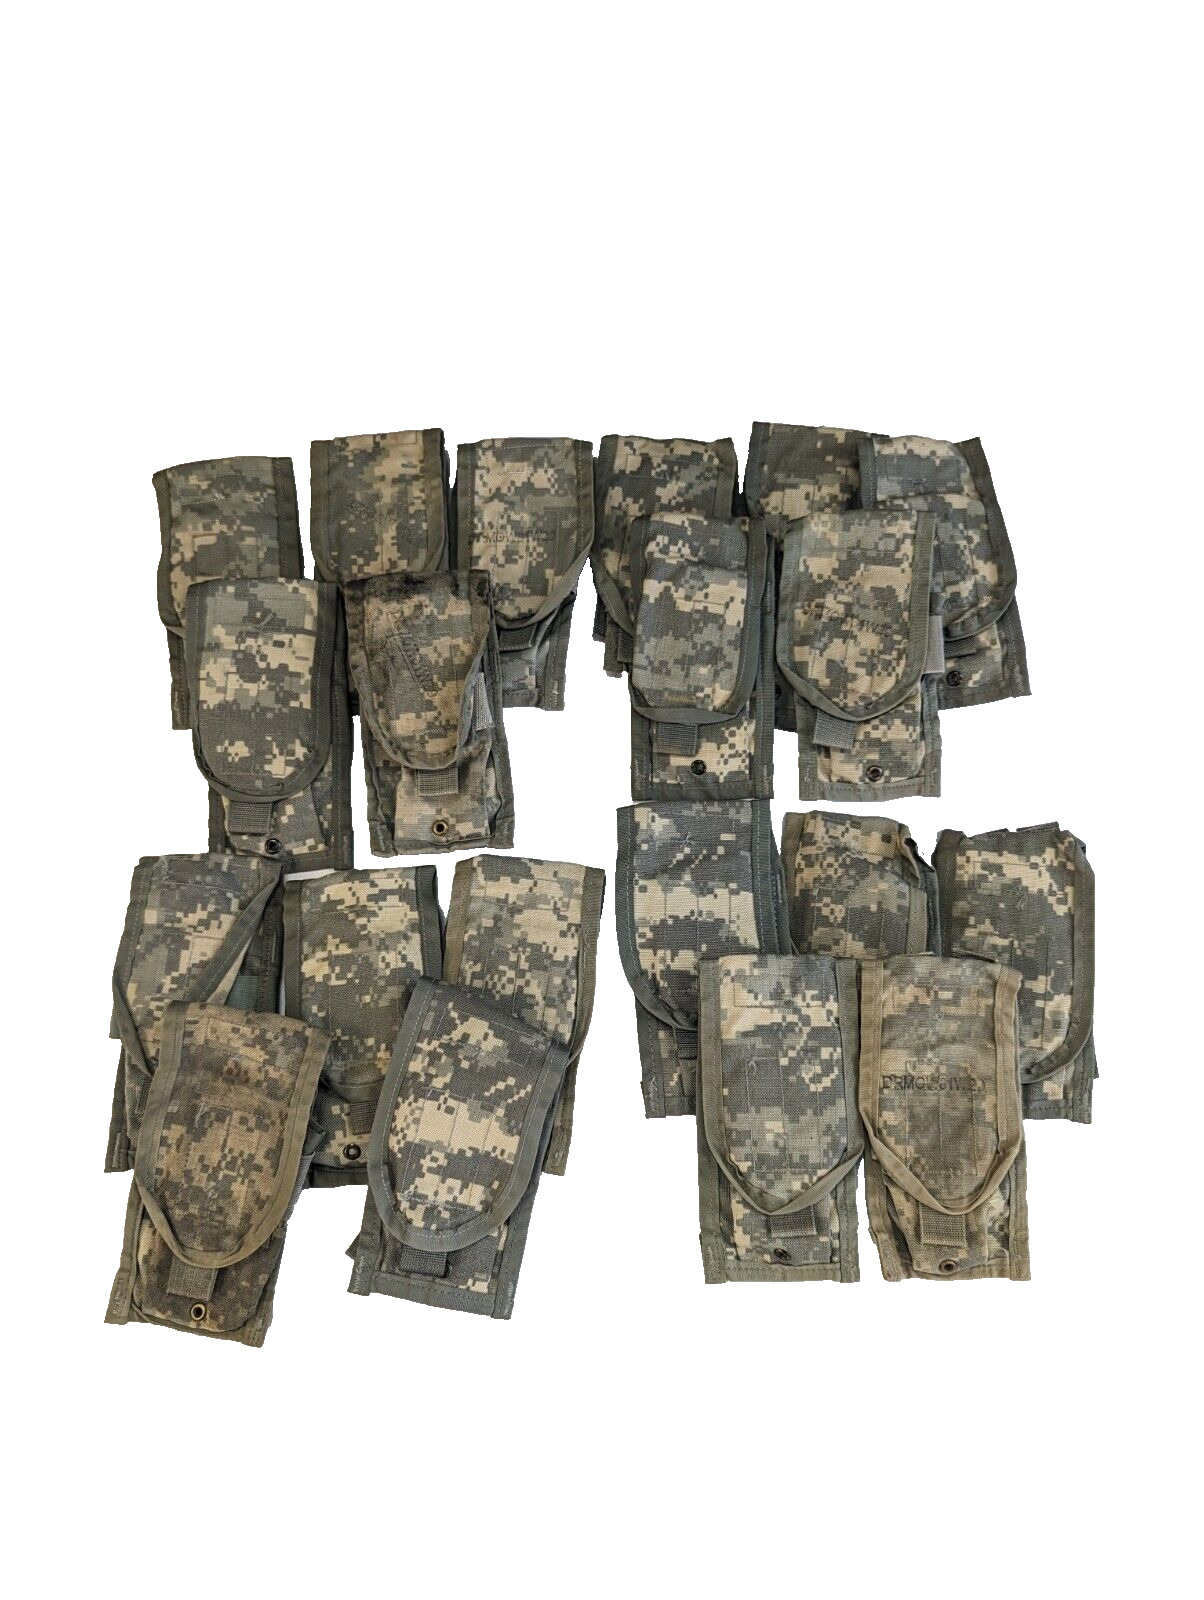 USGI ACU MOLLE II (20-PACK) 2-Mag Double Mag Magazine Pouch